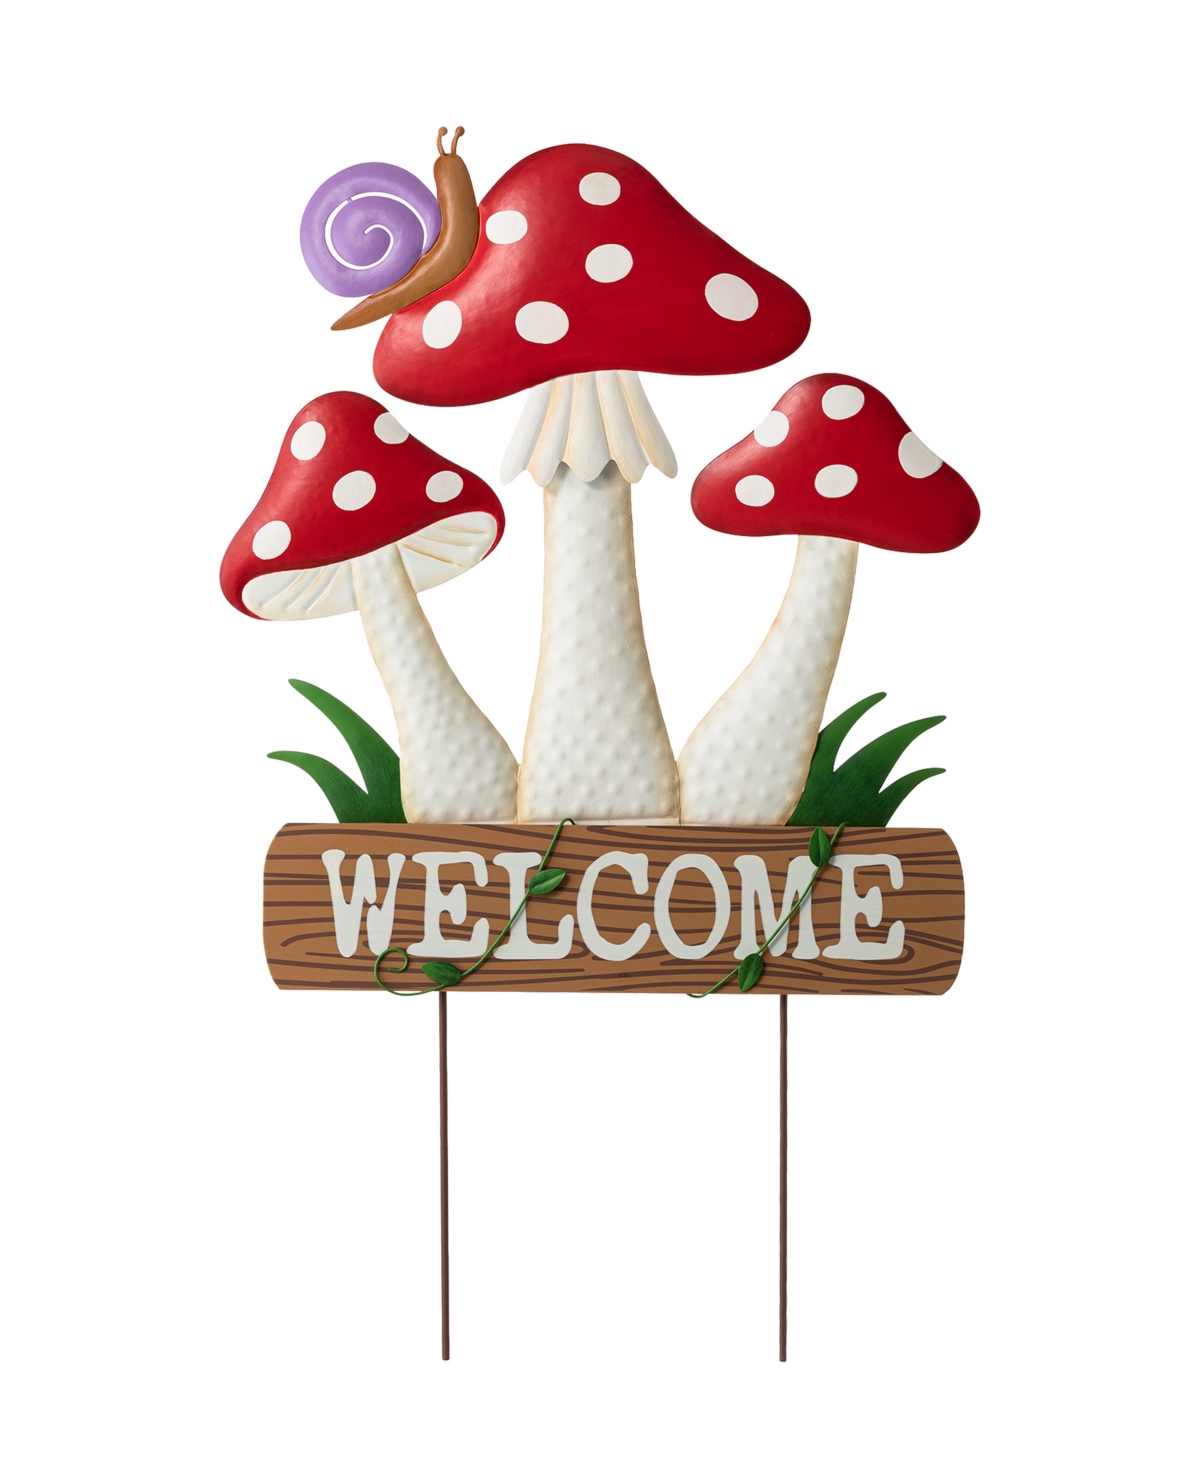 32" H Multi-Functional 2-in-1 Metal and Solid Wood Triple Mushrooms with Welcome Sign Garden Yard Stake, Wall Decor - Multi